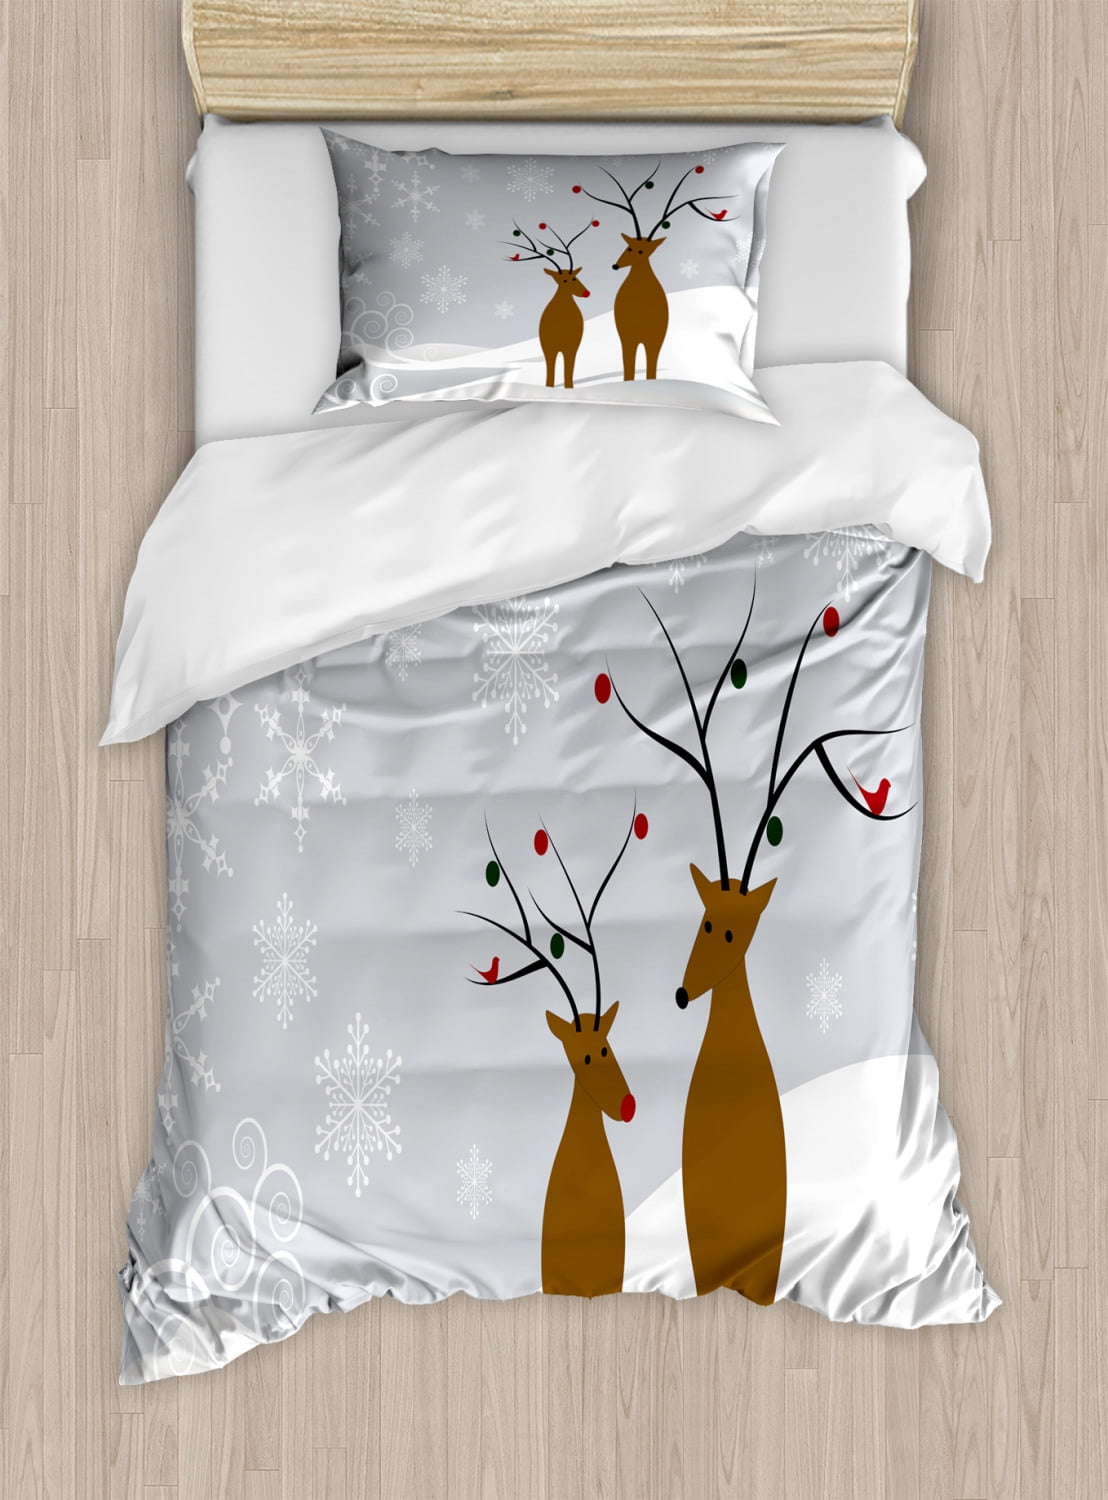 Christmas Duvet Cover Set Queen Size, Cute Reindeers at Noel Time Yule with  Snowflakes in Winter Santa Print, Decorative 3 Piece Bedding Set with 2